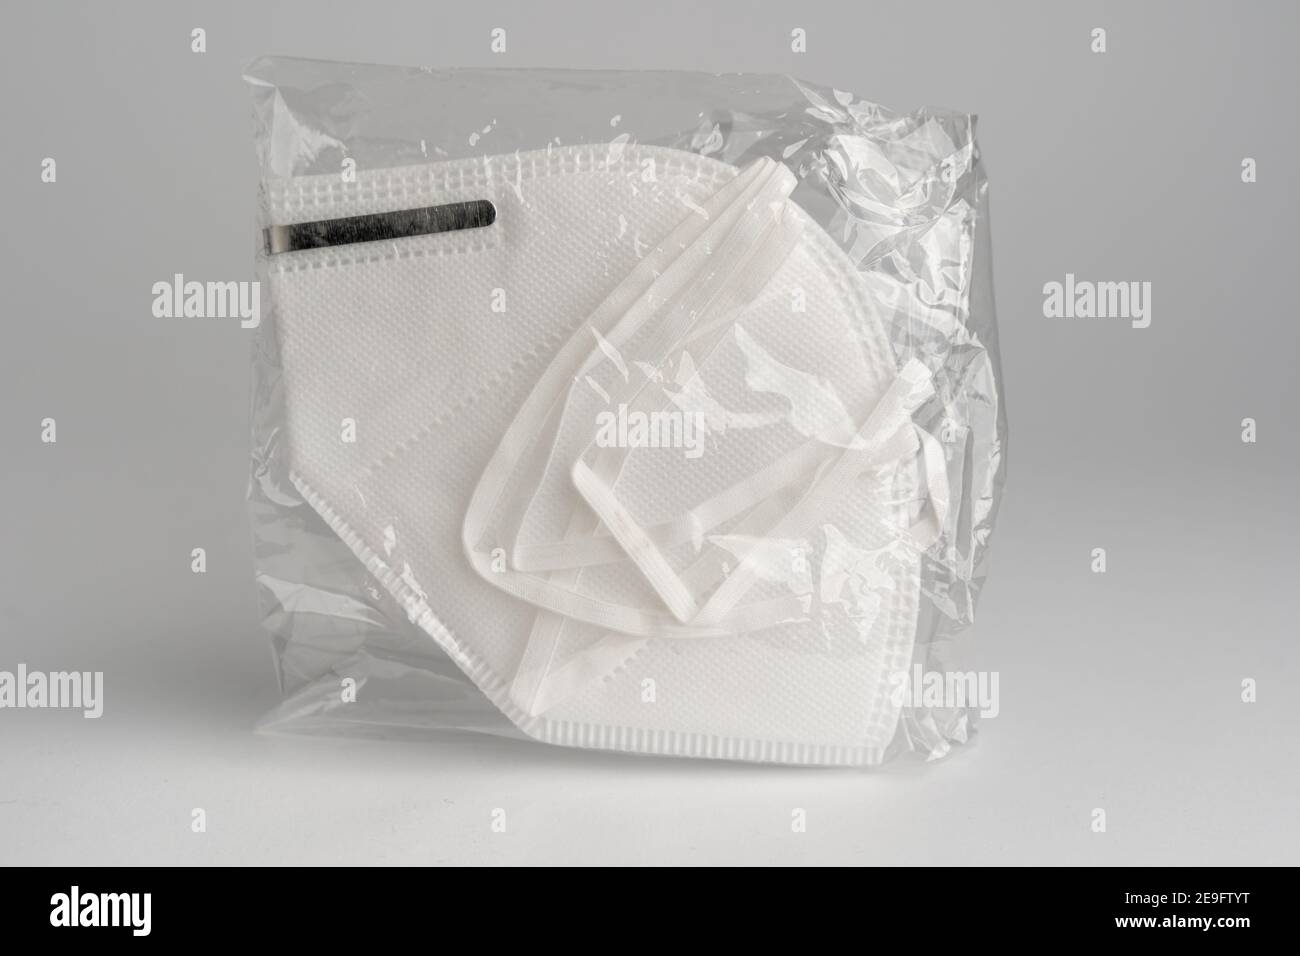 Wrapped FFP2 face mask in white in front of clean background. Certified disposable protection to reduce aerosol emission during Covid-19 pandemic. Stock Photo